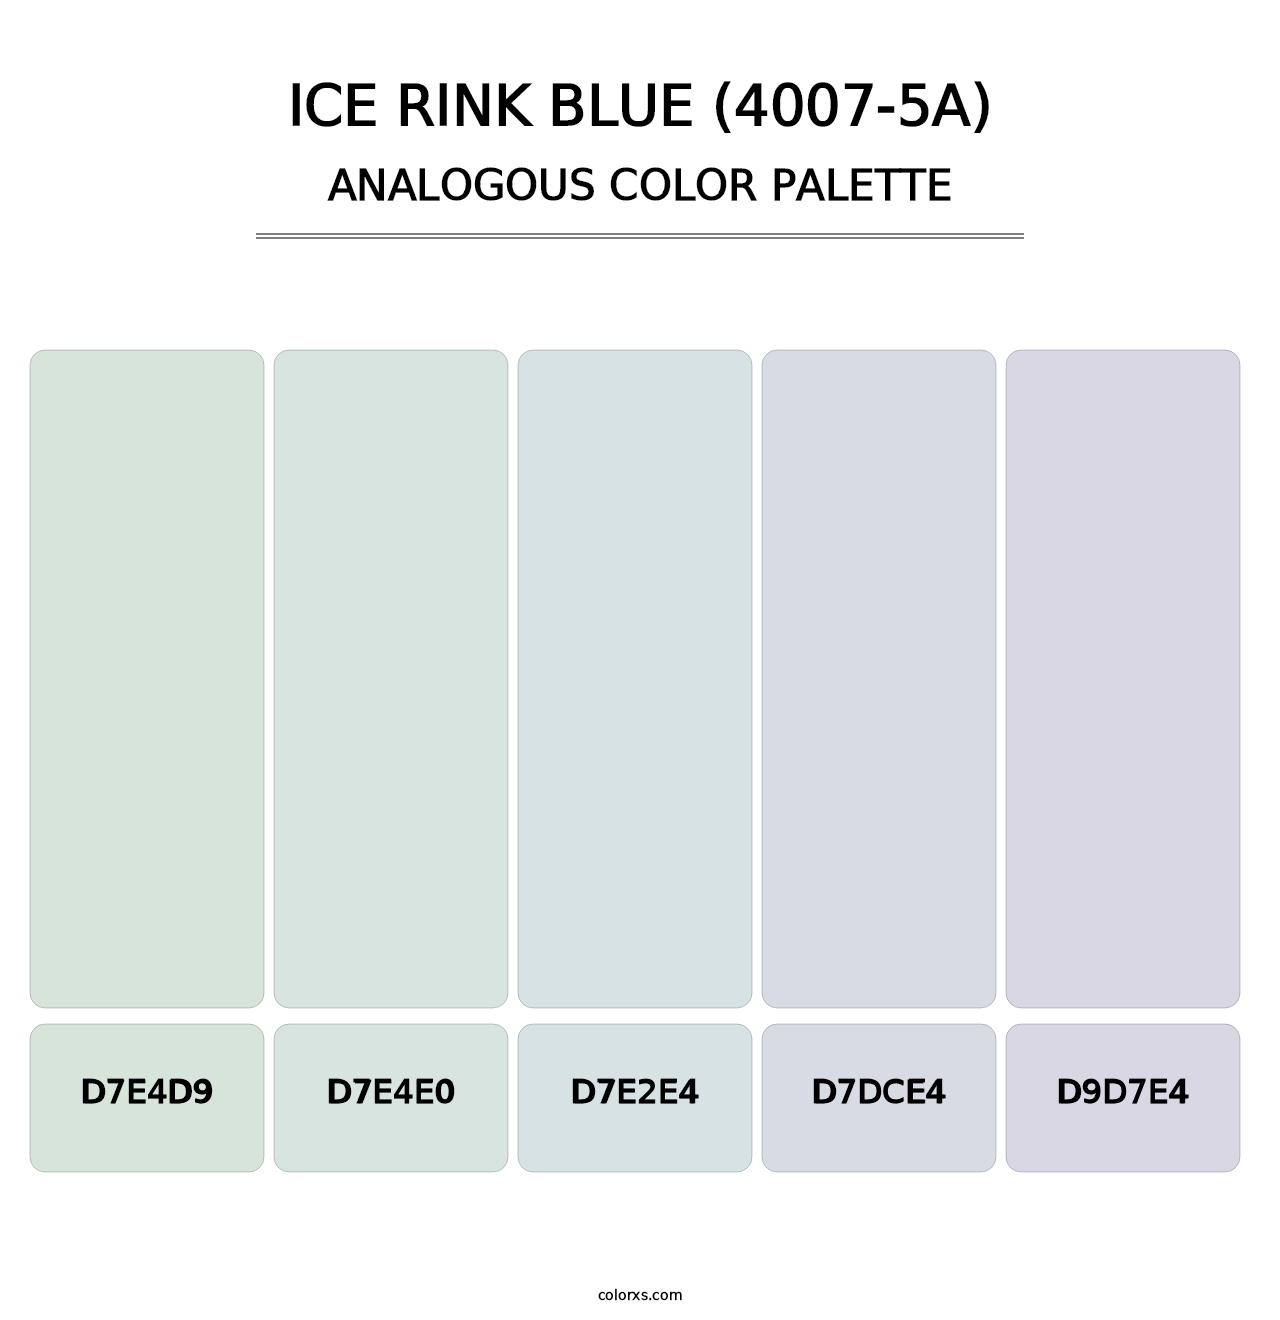 Ice Rink Blue (4007-5A) - Analogous Color Palette